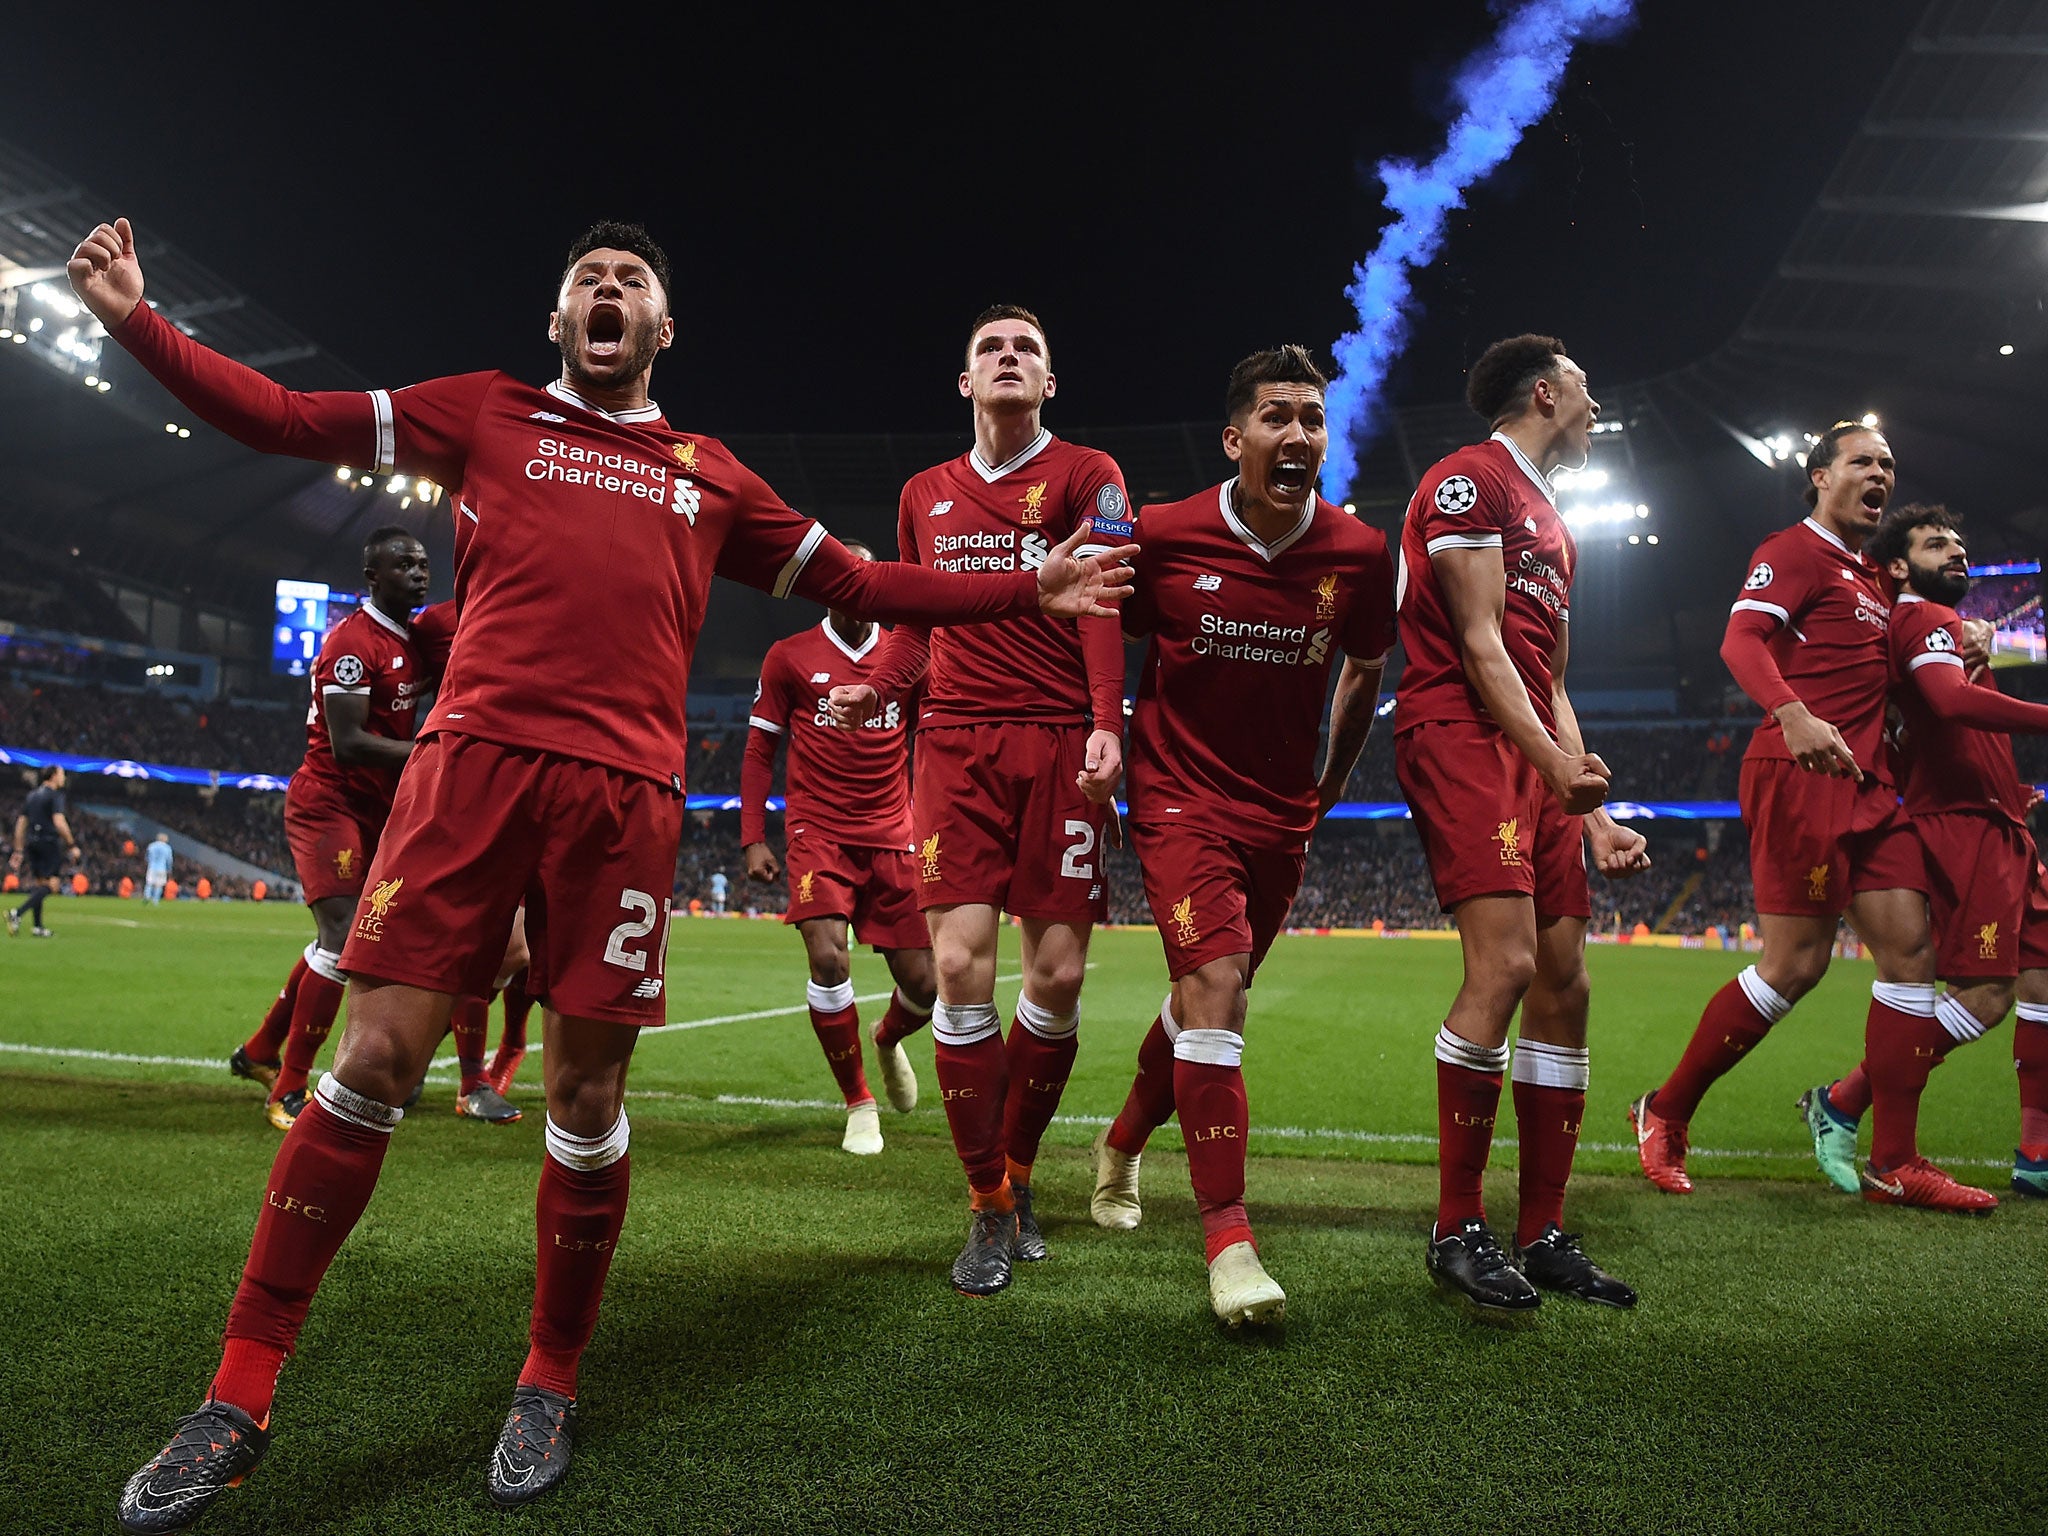 Liverpool's combination of speed and attacking prowess has blown sides away in the Champions League